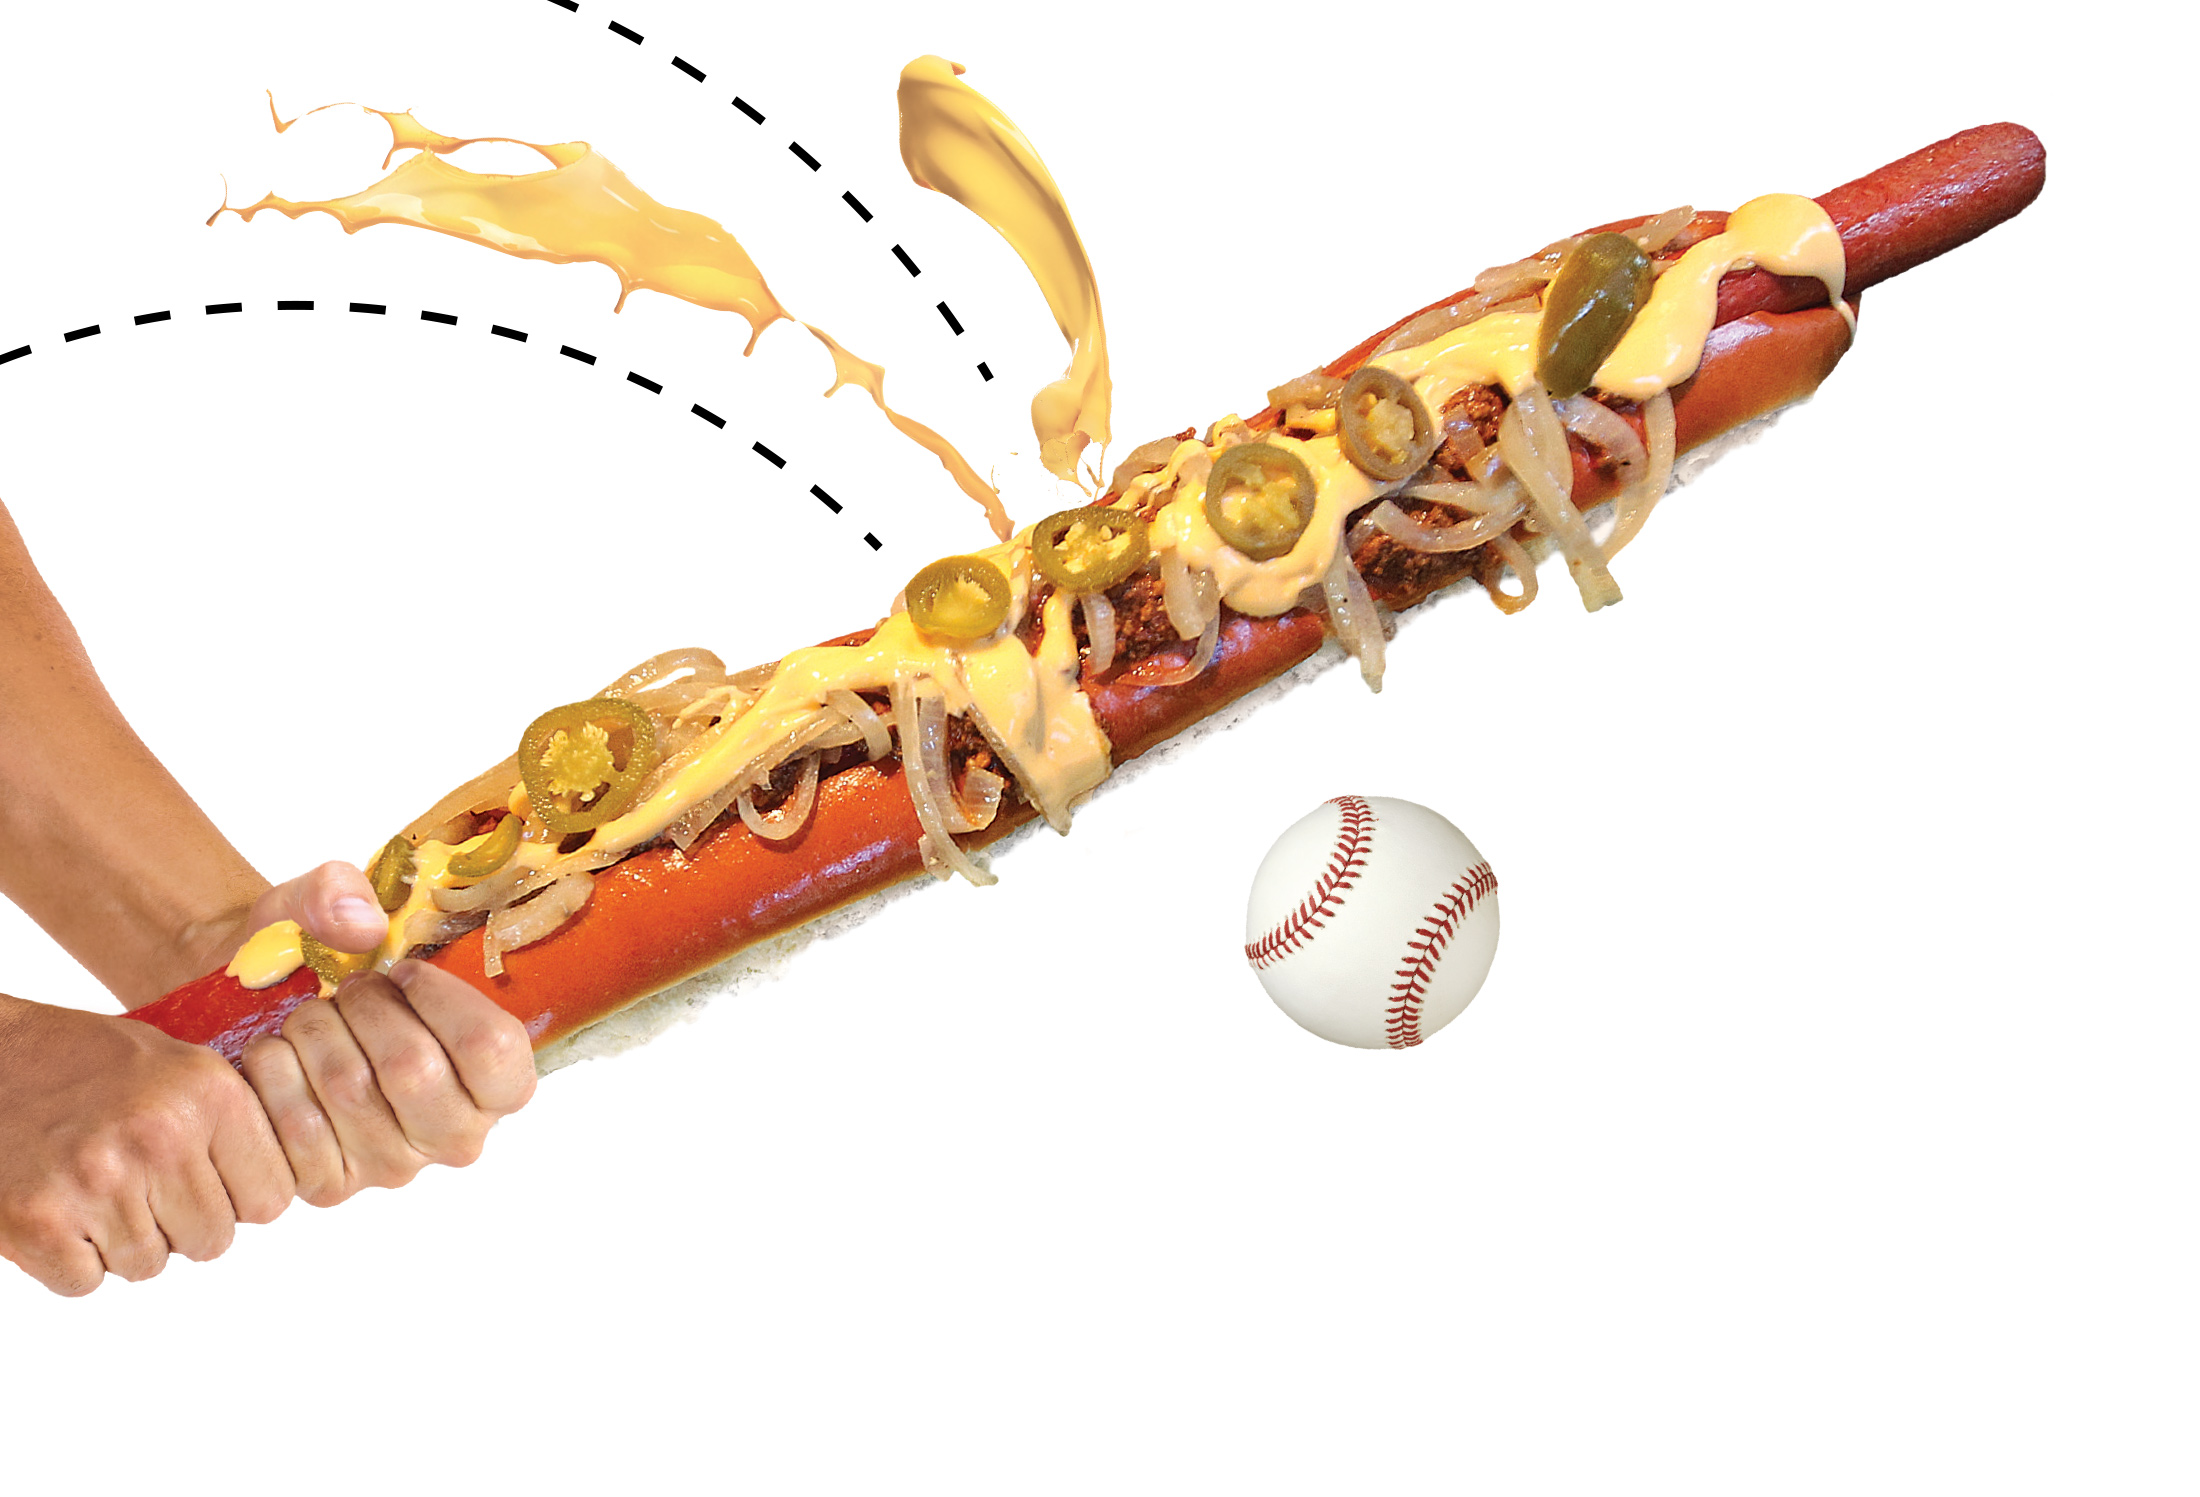 The viral Texas Rangers Boomstick hot dog has actually been around for years